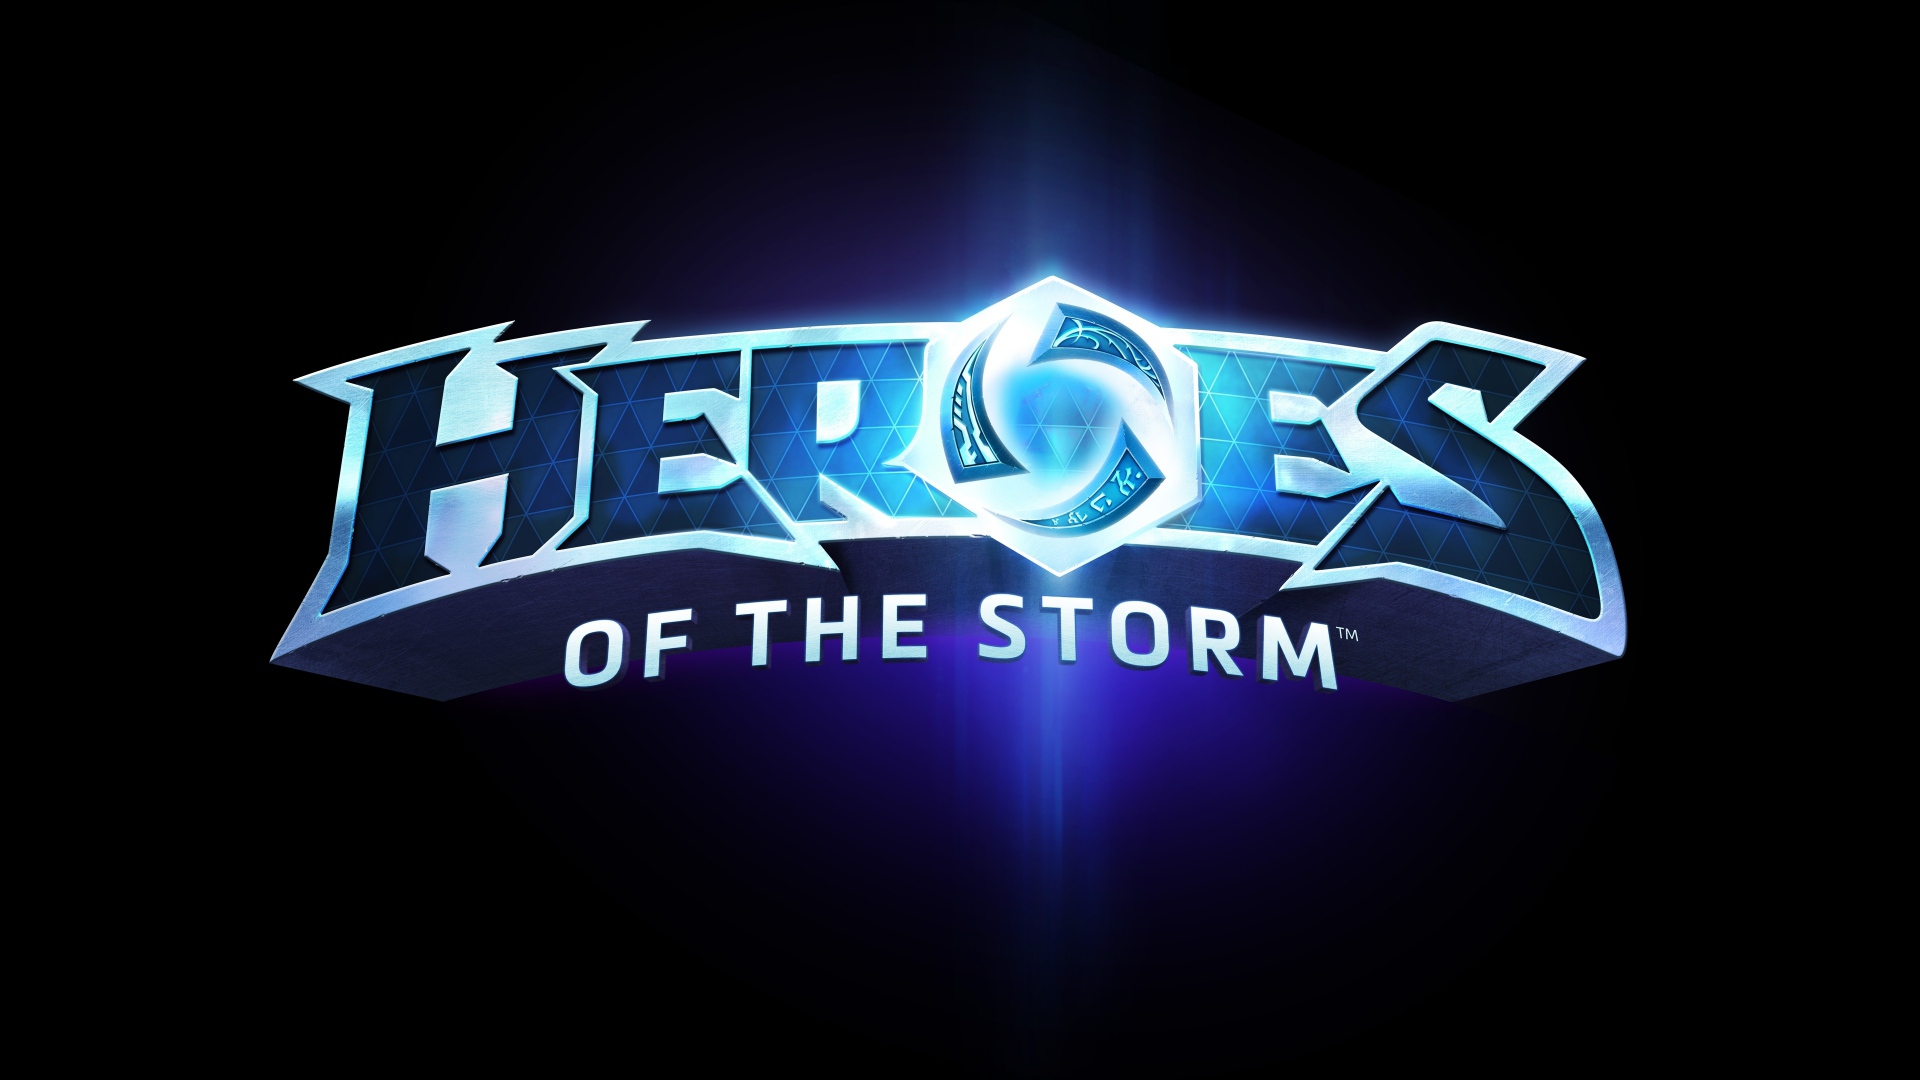 Wallpaper Heroes Of The Storm Blizzard Entertainment Blue